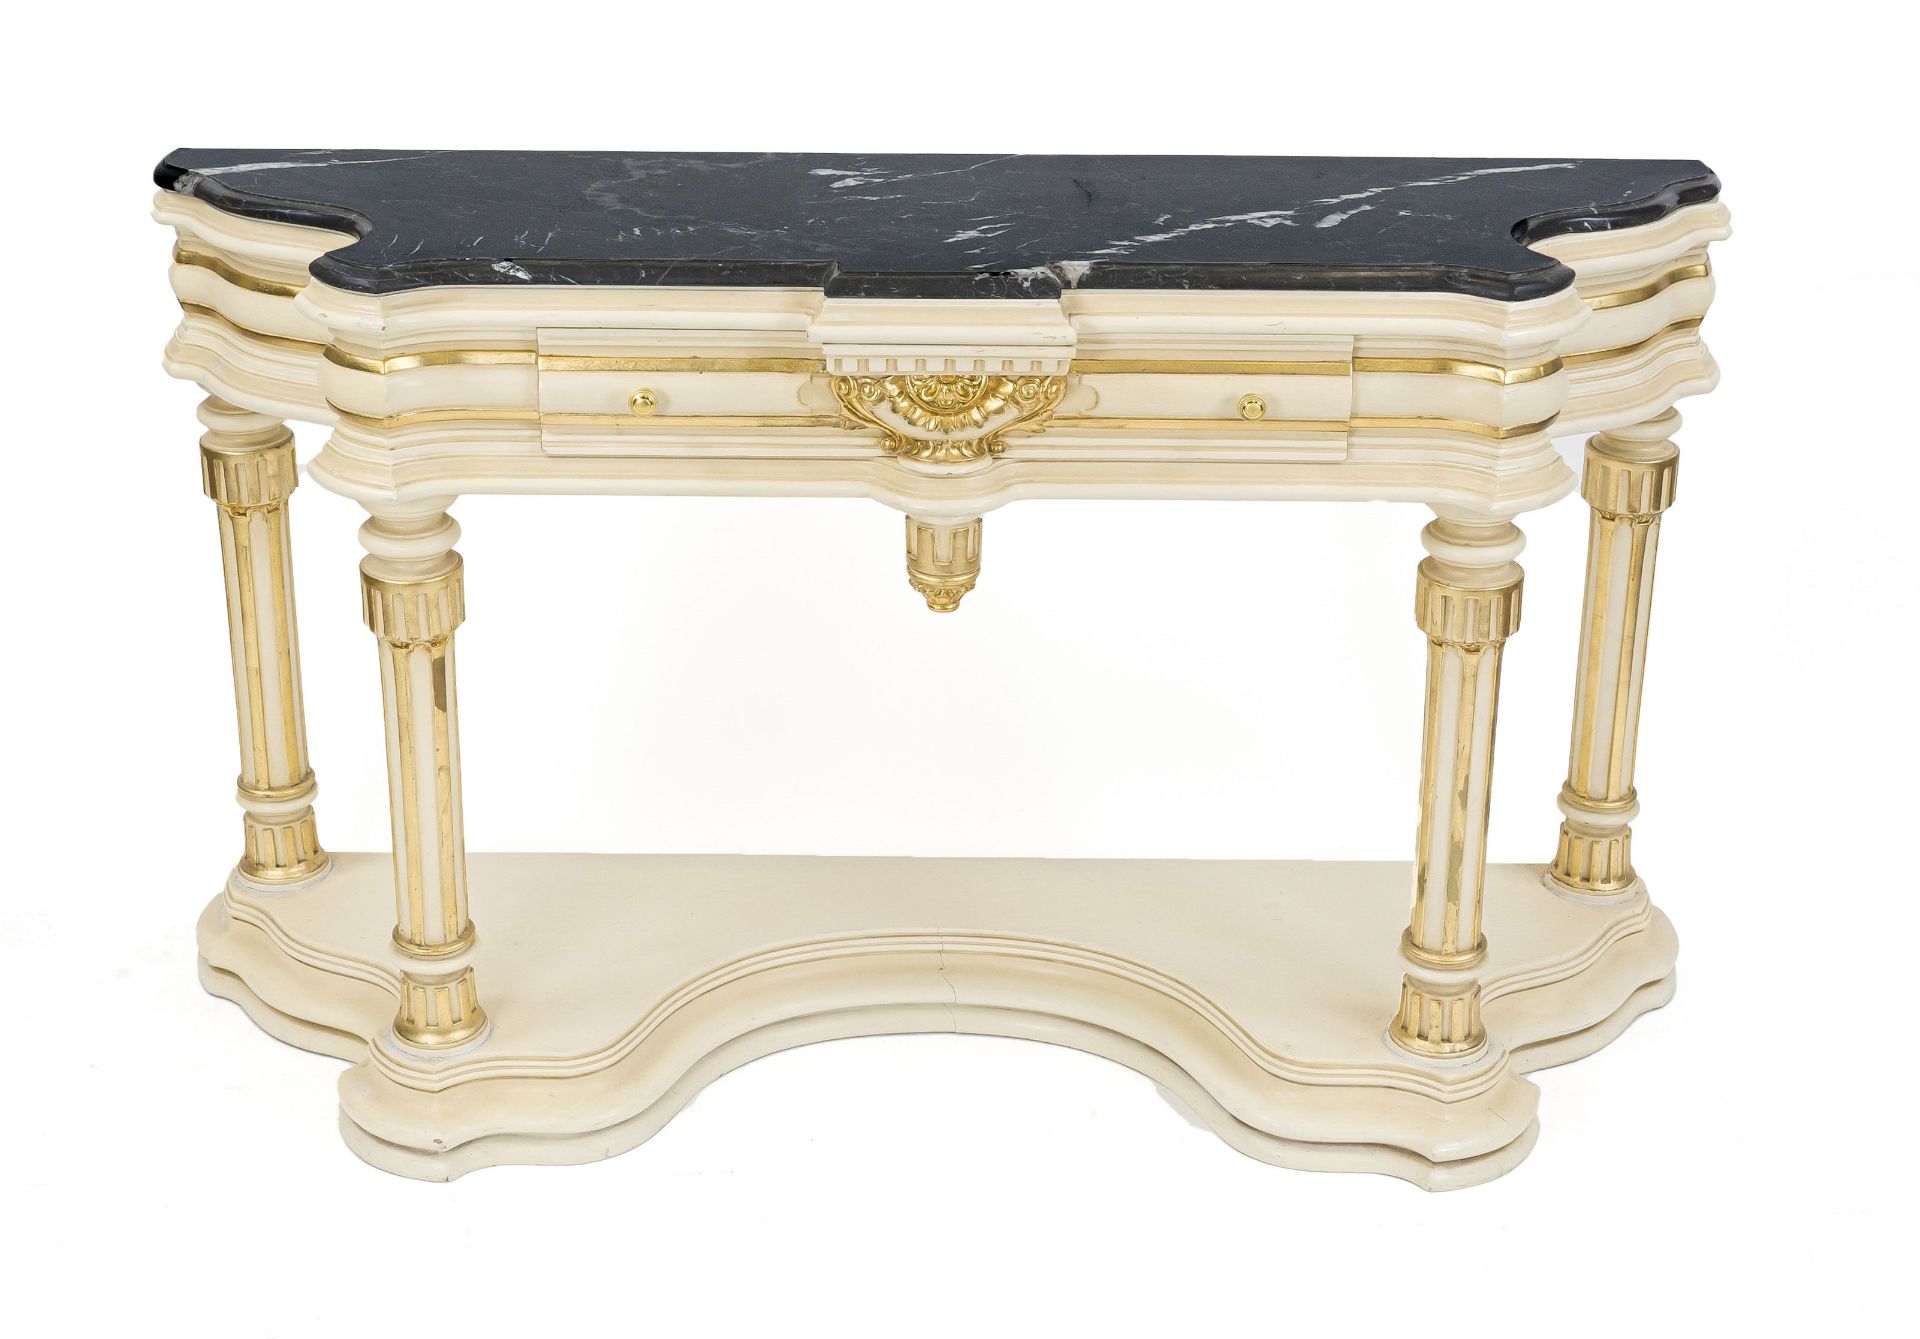 Console in Louis-Seize style, 20th century, wood carved, painted and partly gilded, standing on four